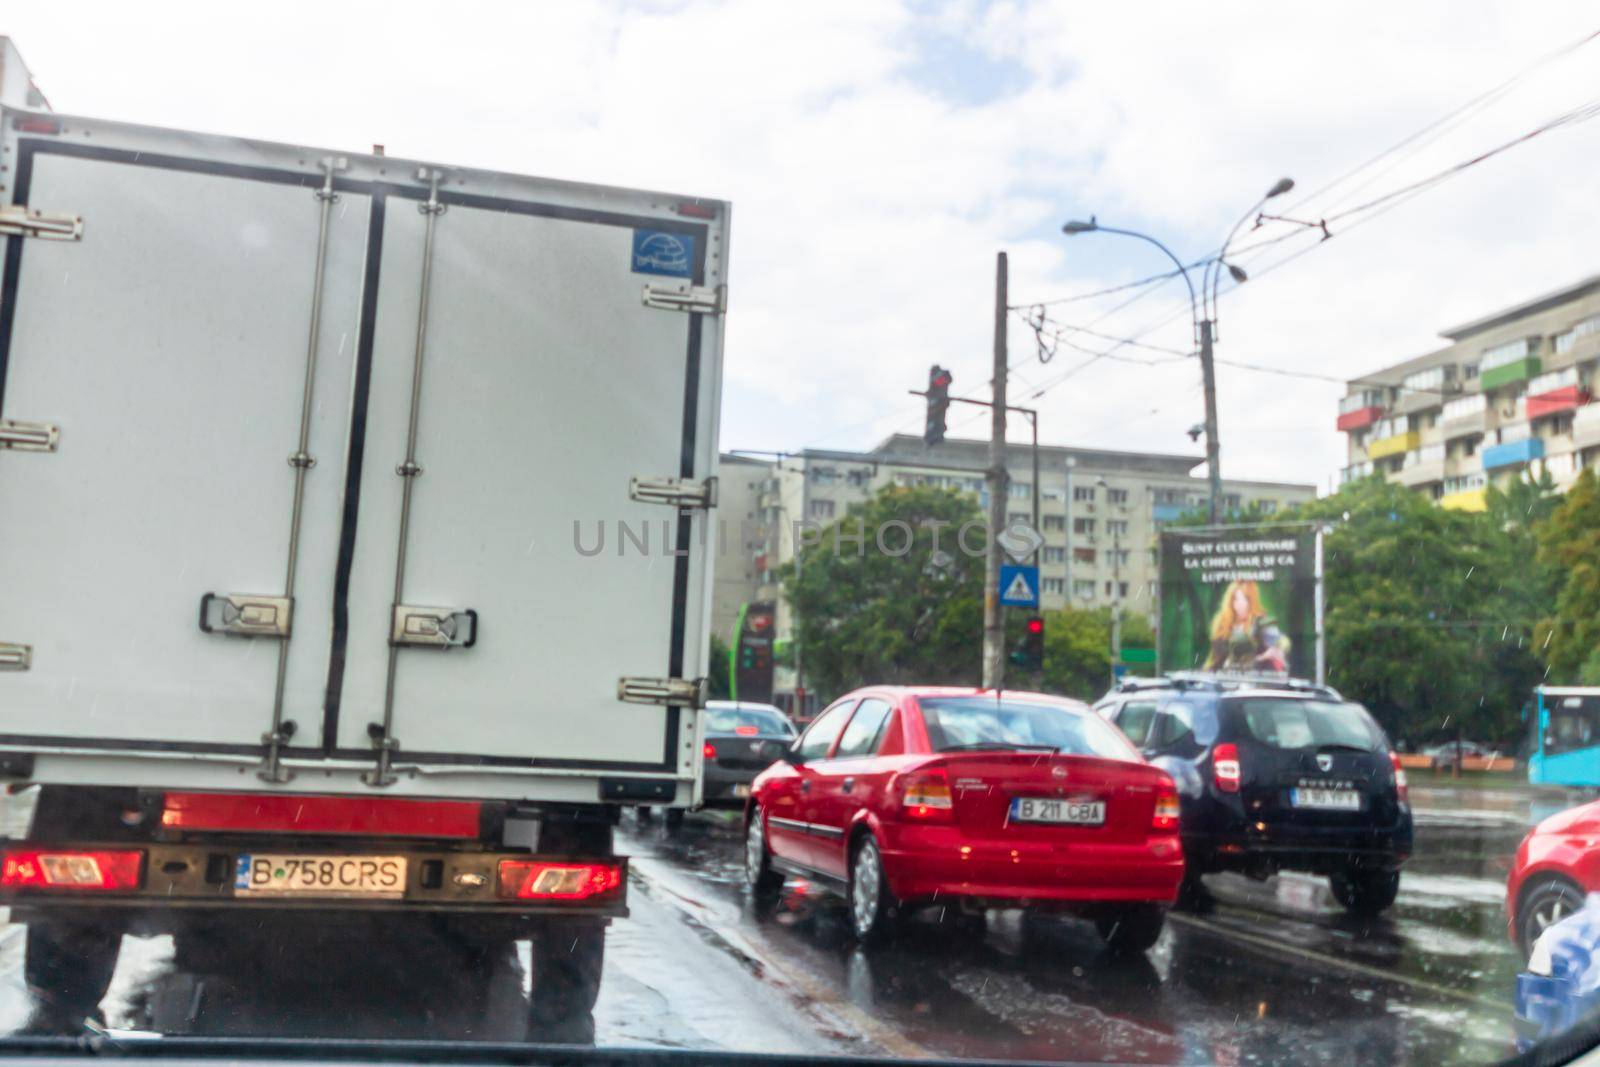 Traffic in cloudy rainy day with road view through car front window in Bucharest, Romania, 2020